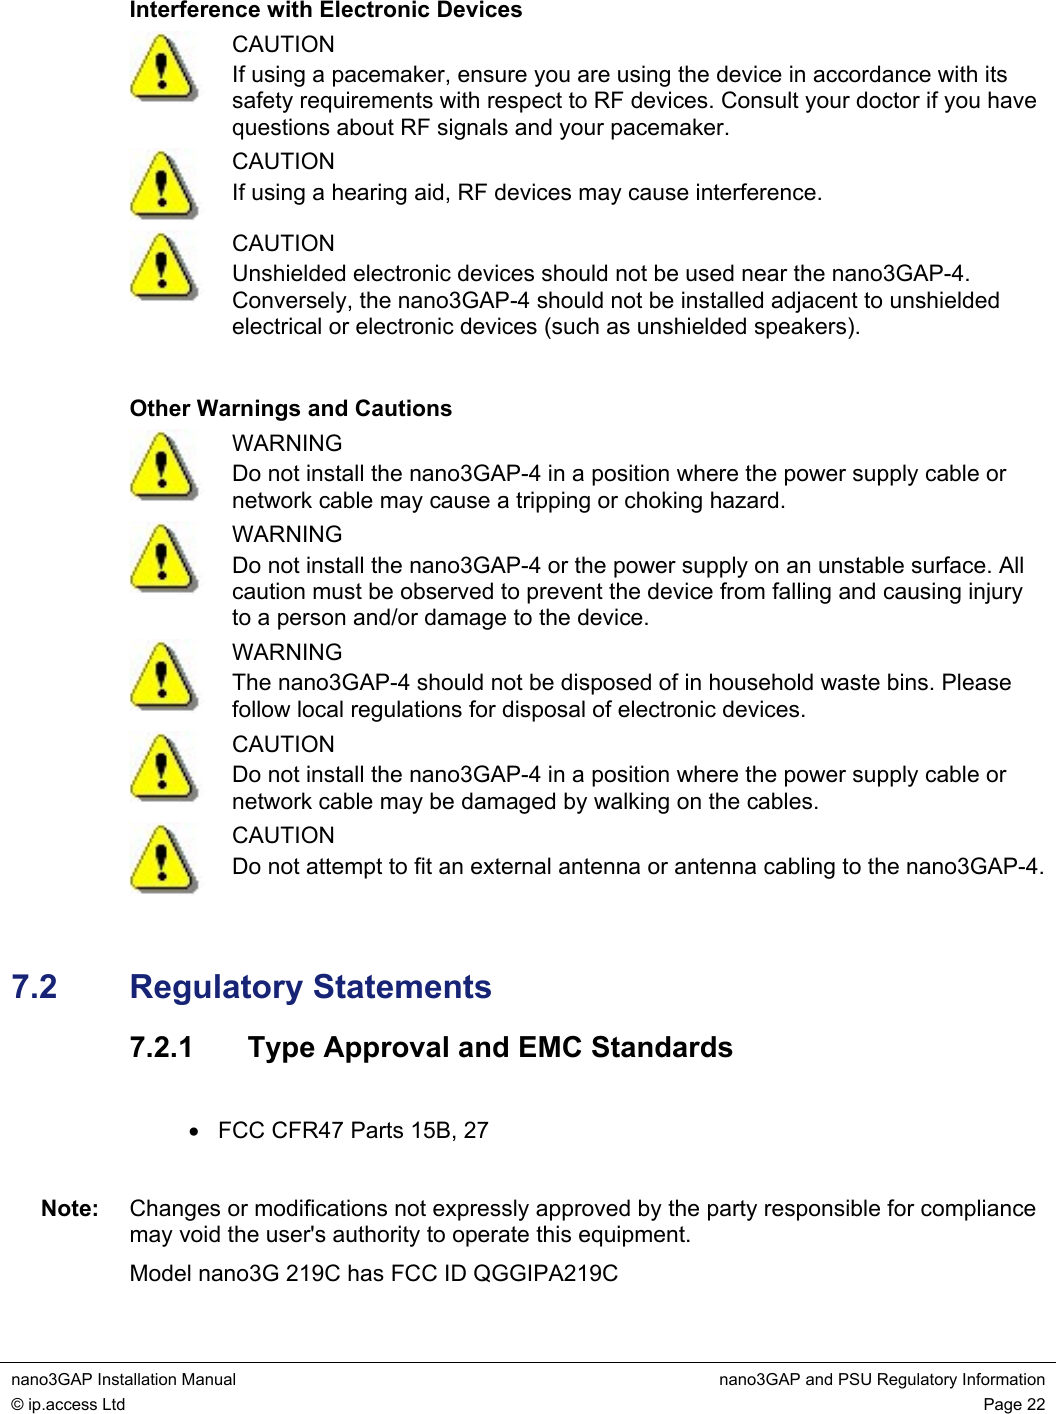  nano3GAP Installation Manual  nano3GAP and PSU Regulatory Information © ip.access Ltd  Page 22  Interference with Electronic Devices  CAUTION If using a pacemaker, ensure you are using the device in accordance with its safety requirements with respect to RF devices. Consult your doctor if you have questions about RF signals and your pacemaker.  CAUTION If using a hearing aid, RF devices may cause interference.  CAUTION Unshielded electronic devices should not be used near the nano3GAP-4. Conversely, the nano3GAP-4 should not be installed adjacent to unshielded electrical or electronic devices (such as unshielded speakers).  Other Warnings and Cautions  WARNING Do not install the nano3GAP-4 in a position where the power supply cable or network cable may cause a tripping or choking hazard.  WARNING Do not install the nano3GAP-4 or the power supply on an unstable surface. All caution must be observed to prevent the device from falling and causing injury to a person and/or damage to the device.  WARNING The nano3GAP-4 should not be disposed of in household waste bins. Please follow local regulations for disposal of electronic devices.  CAUTION Do not install the nano3GAP-4 in a position where the power supply cable or network cable may be damaged by walking on the cables.  CAUTION Do not attempt to fit an external antenna or antenna cabling to the nano3GAP-4. 7.2  Regulatory Statements 7.2.1  Type Approval and EMC Standards  •  FCC CFR47 Parts 15B, 27  Note:  Changes or modifications not expressly approved by the party responsible for compliance may void the user&apos;s authority to operate this equipment. Model nano3G 219C has FCC ID QGGIPA219C 